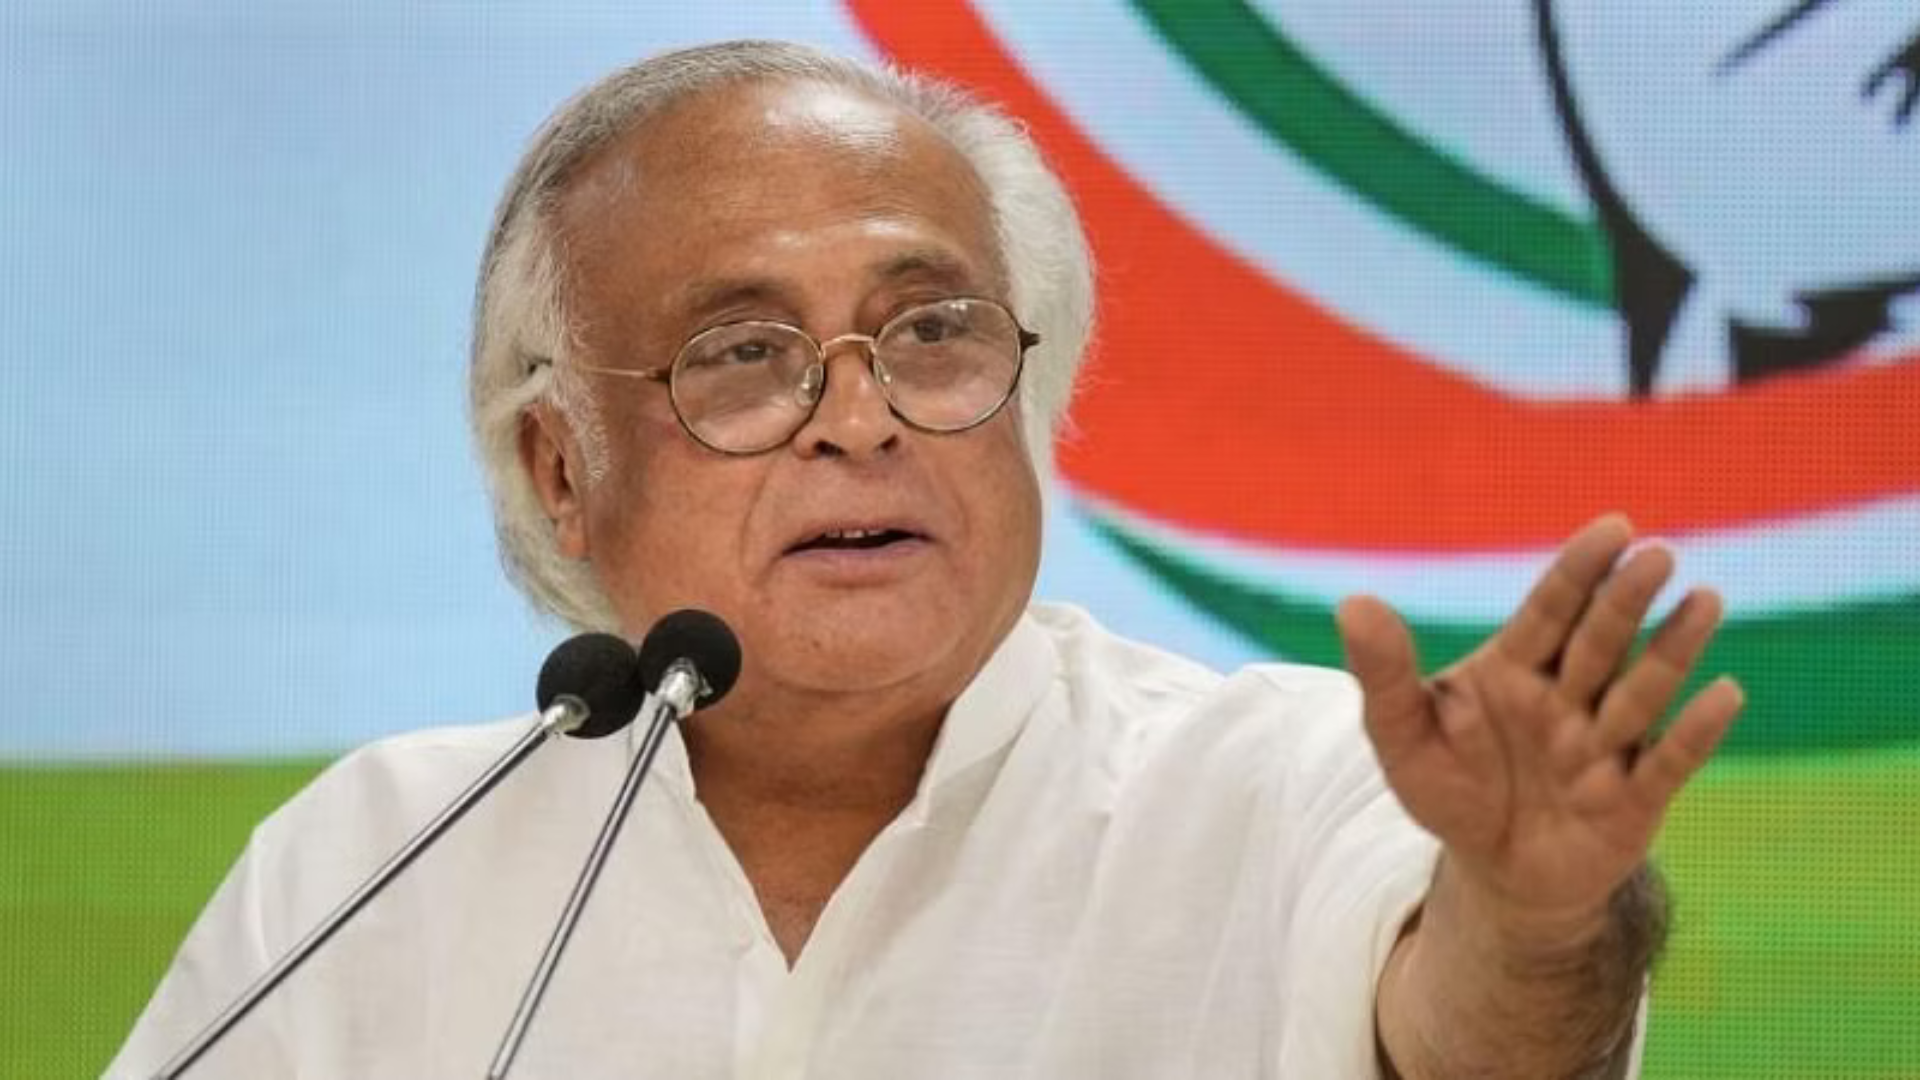 “Serious deterioration of India’s national security environment”: Jairam Ramesh on Army Chief’s remarks